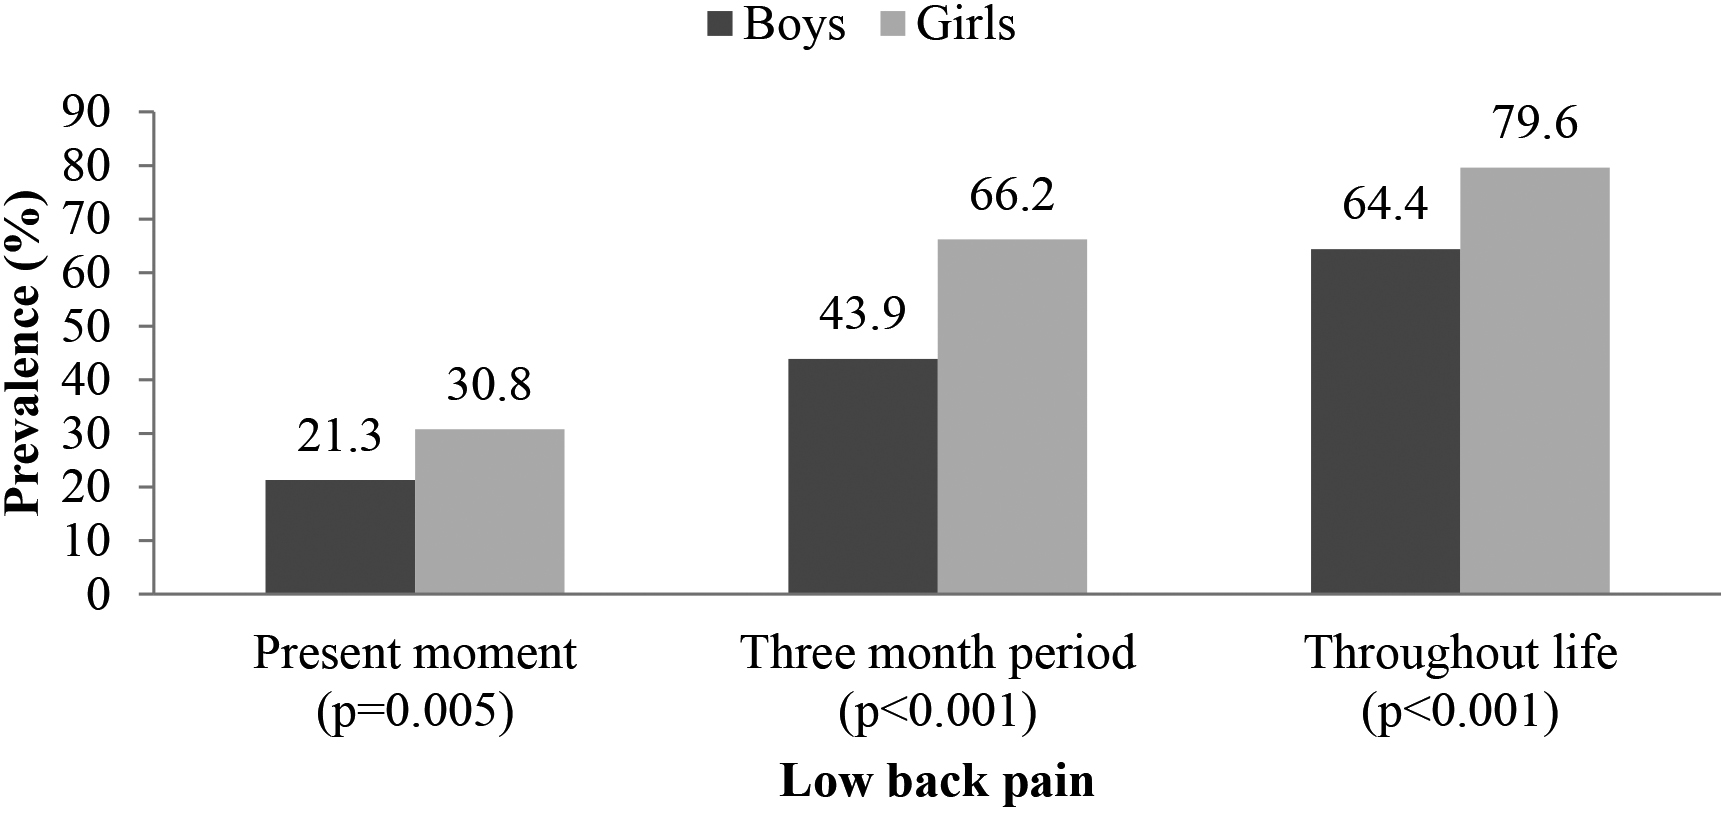 Low back pain prevalence in young male and female people (%).